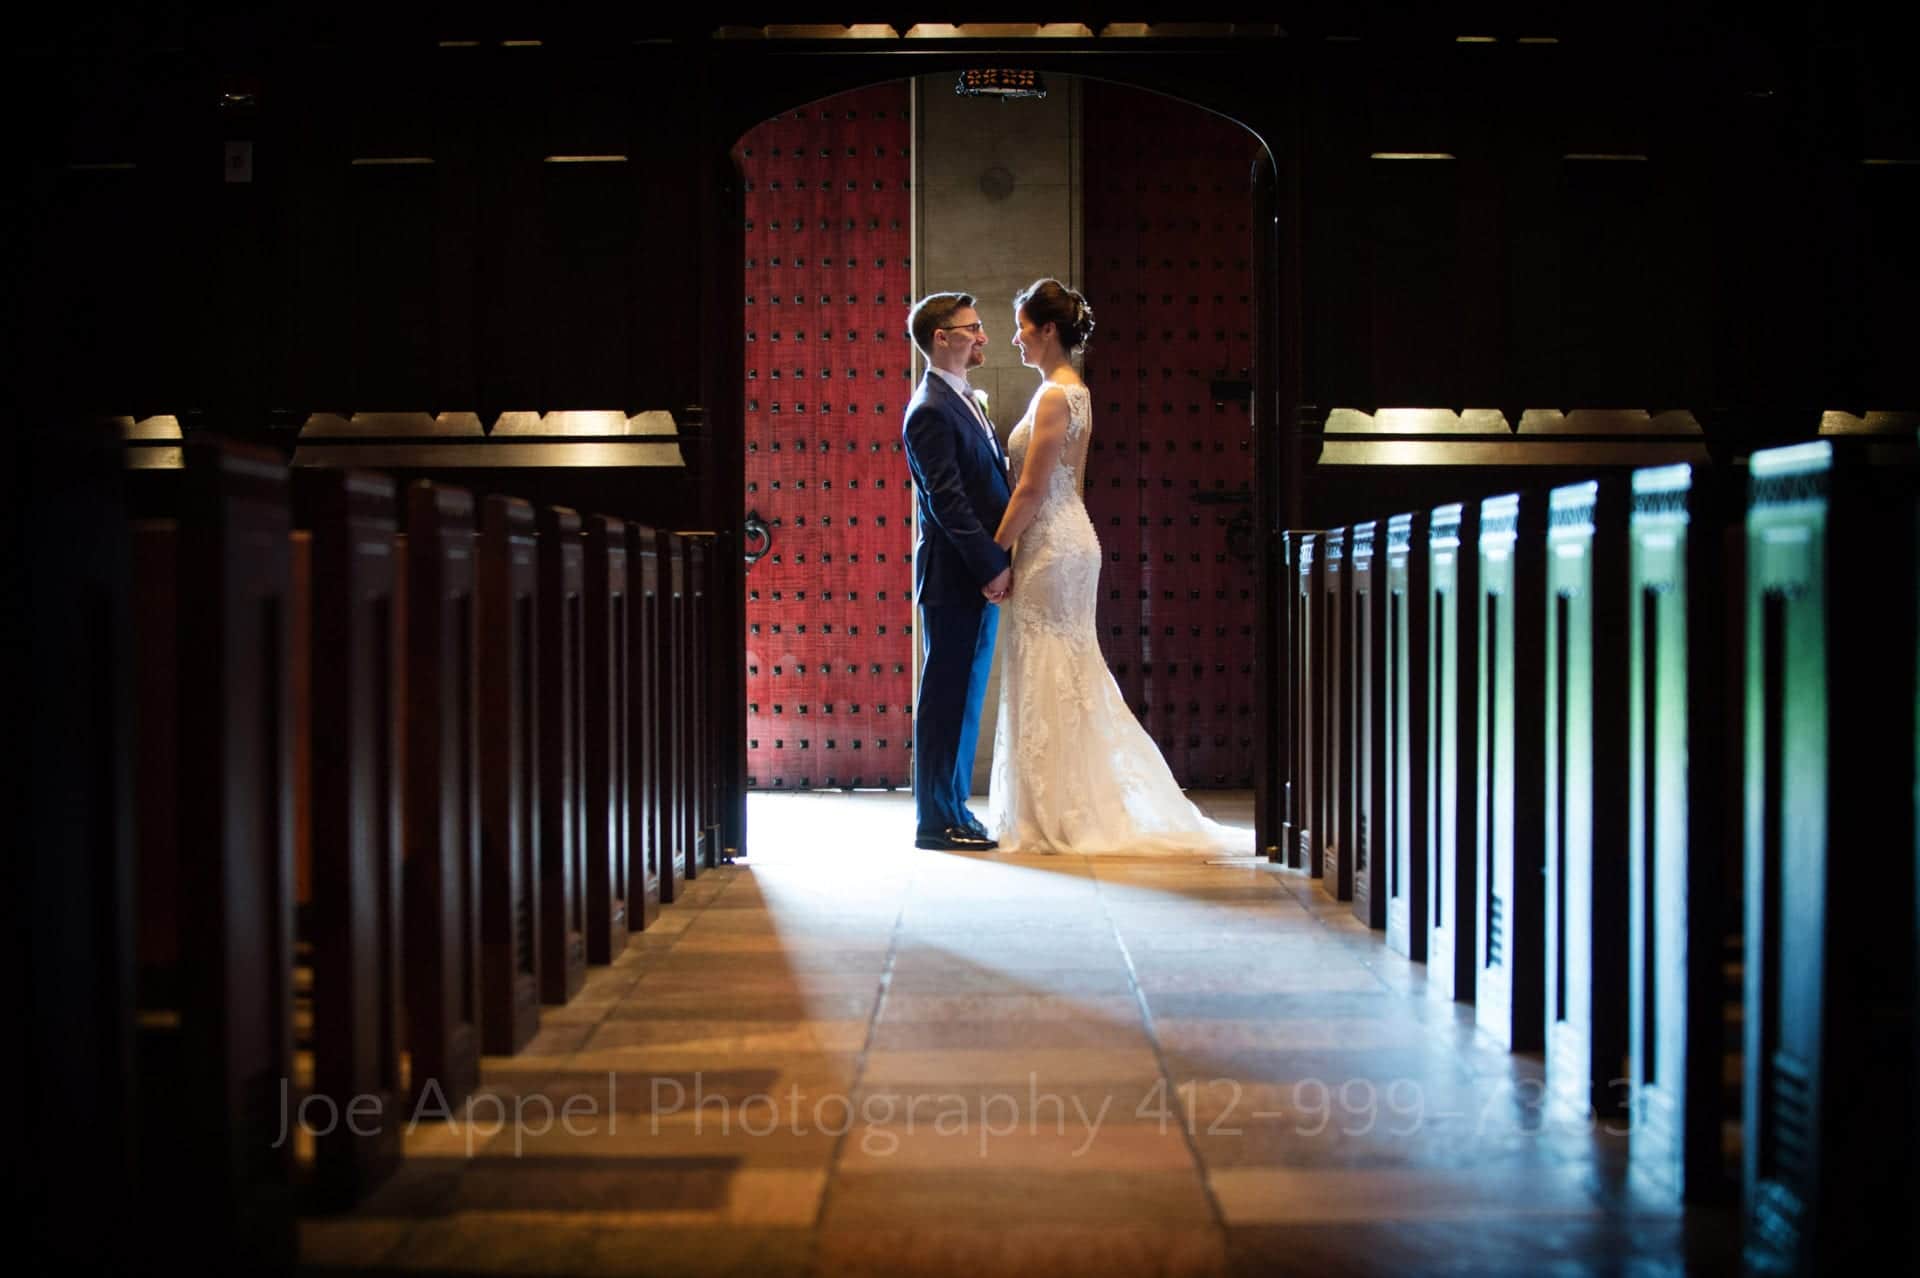 Standing at the back of the church, a bride and groom are rim lit from the open door behind them.